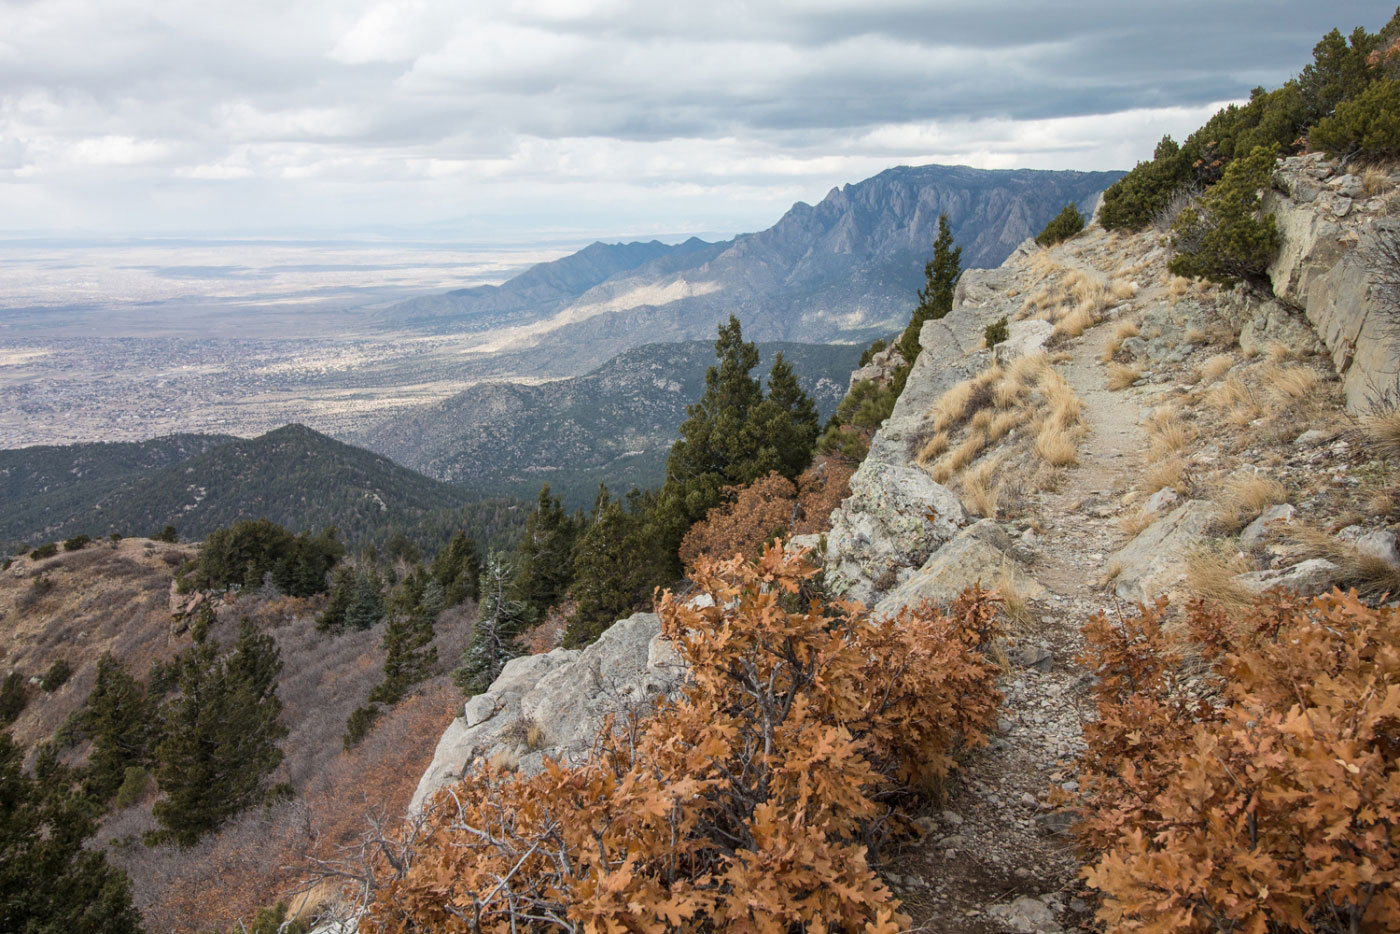 Hike South Sandia Peak via Oso Ridge and Embudito Loop in Cibola National Forest, New Mexico - Stav is Lost